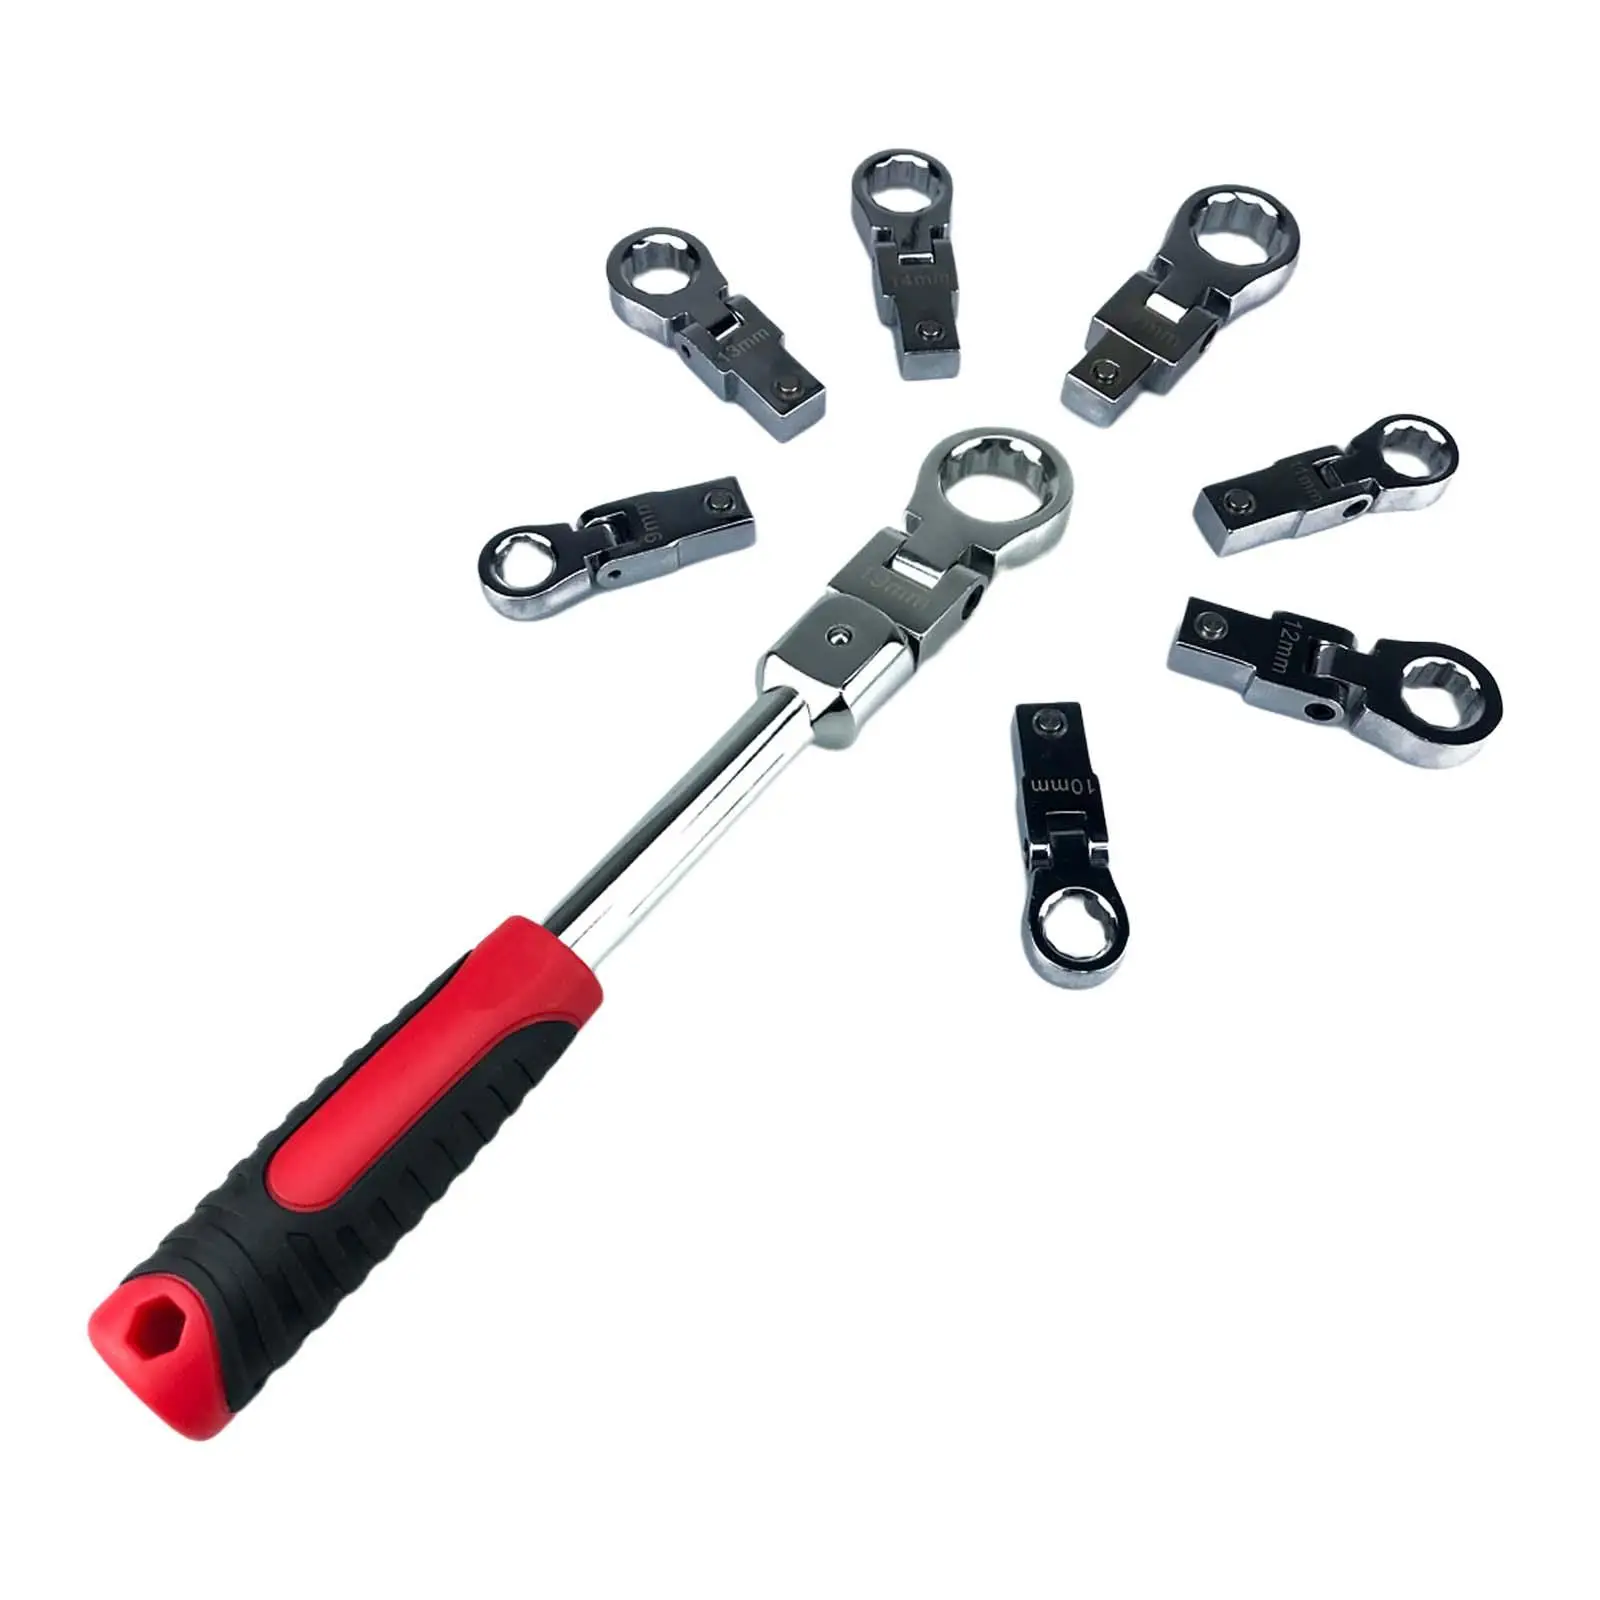 

9 Pieces Flex Offset Ratcheting Wrench Nonslip Flex Head Multipurpose 180° Rotation Head Standard Combination Ratchet Wrenches